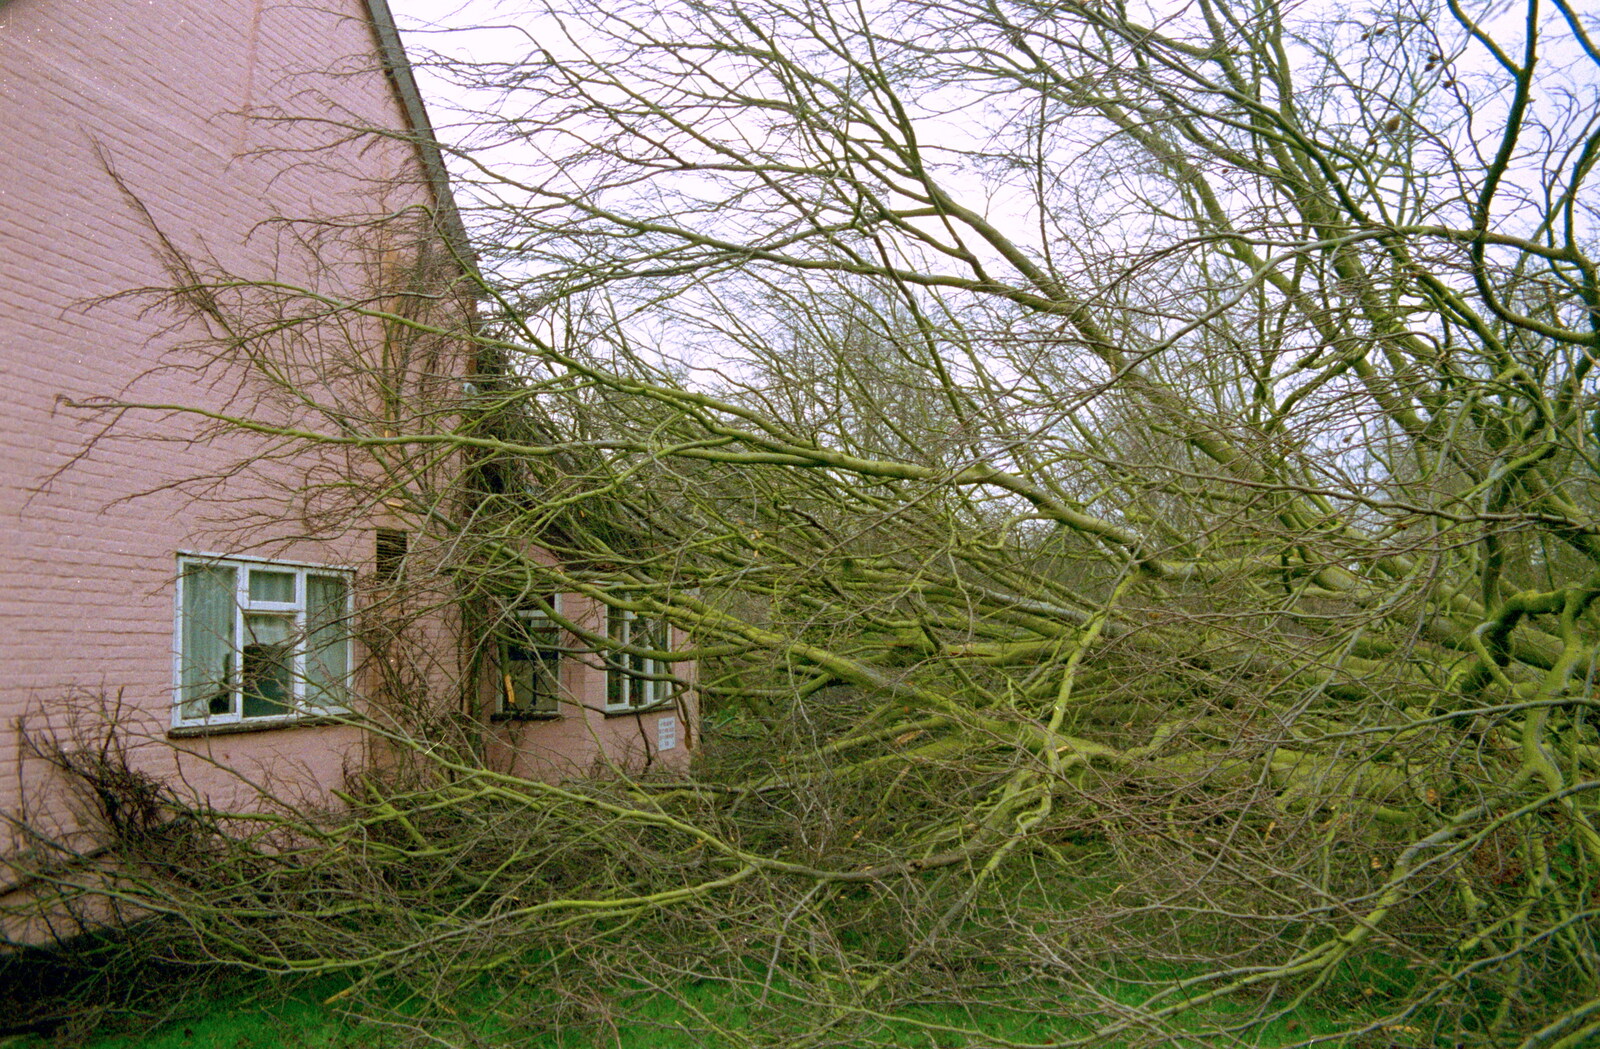 A Fallen Tree at The Swan, Brome, Suffolk - January 21st 2001: Tree!